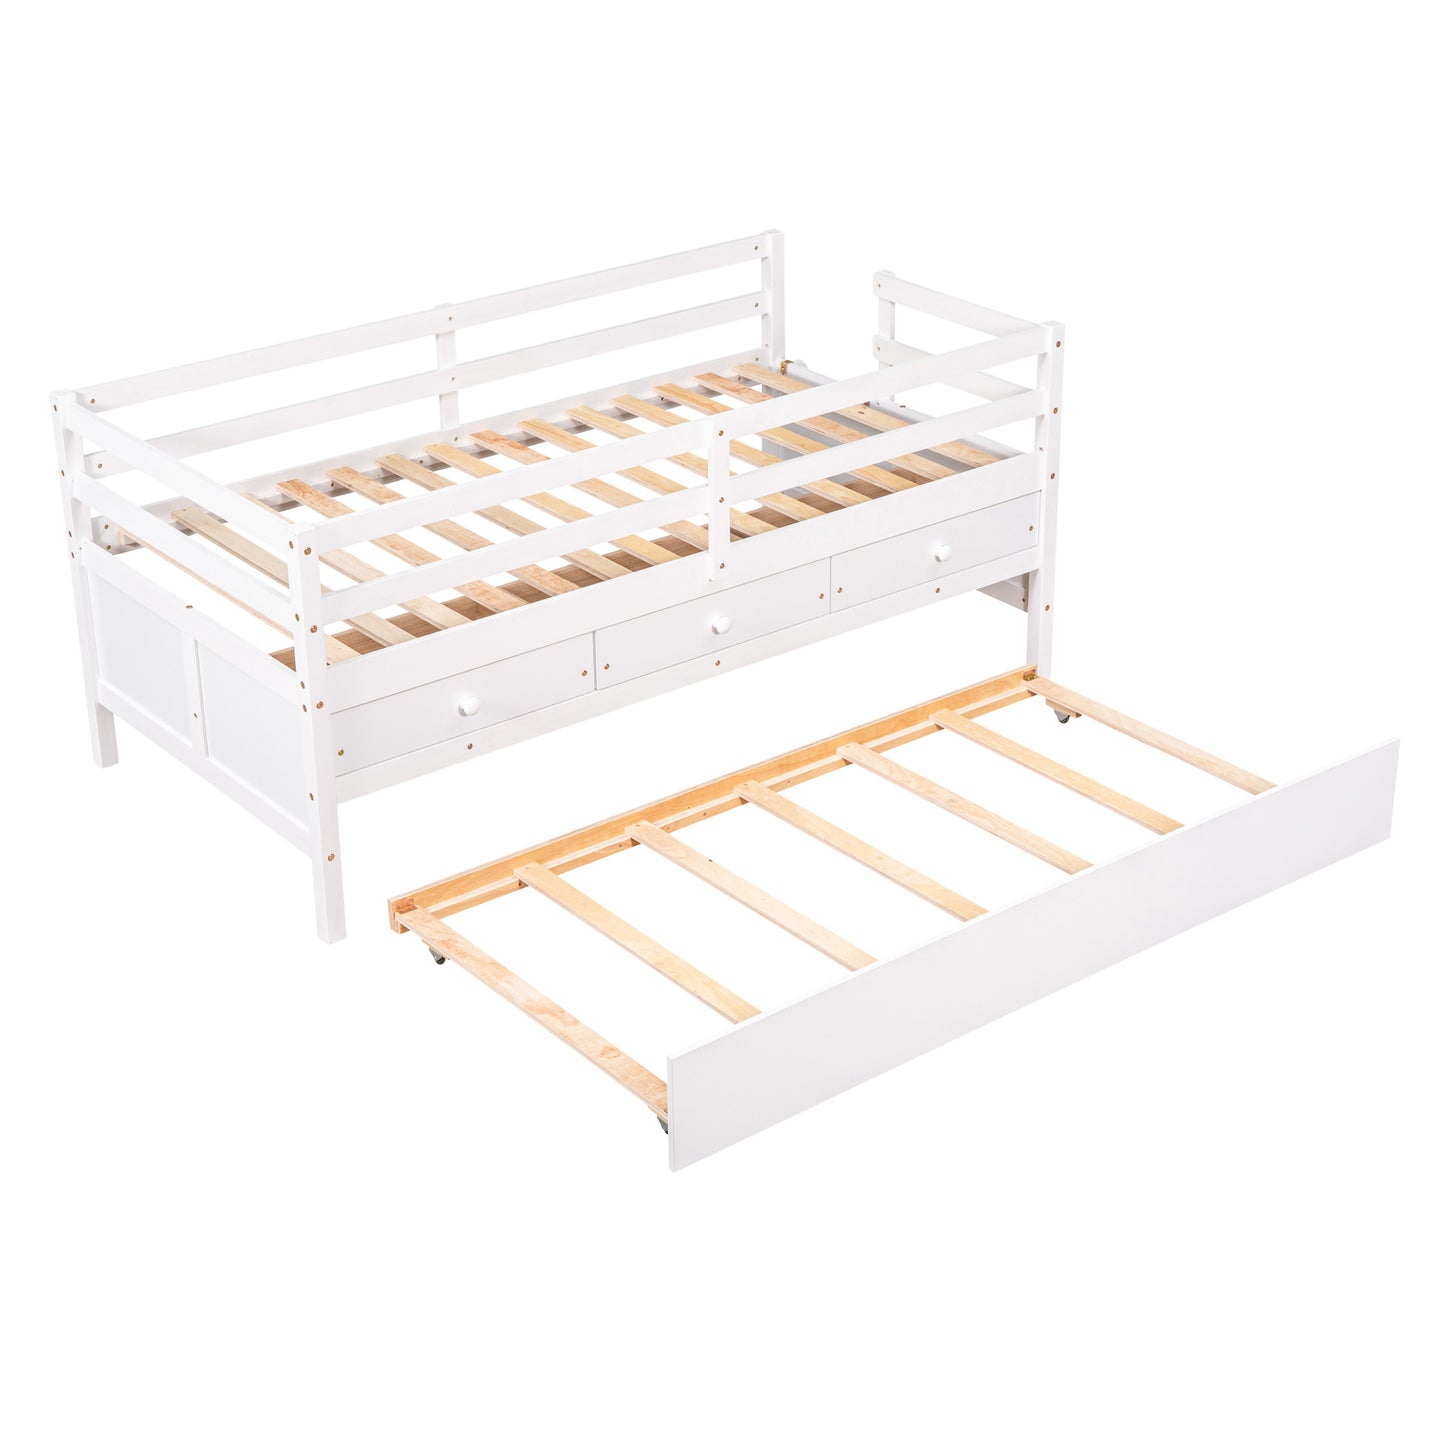 Low Loft Bed Twin Size with Full Safety Fence, Climbing ladder, Storage Drawers and Trundle White Solid Wood Bed